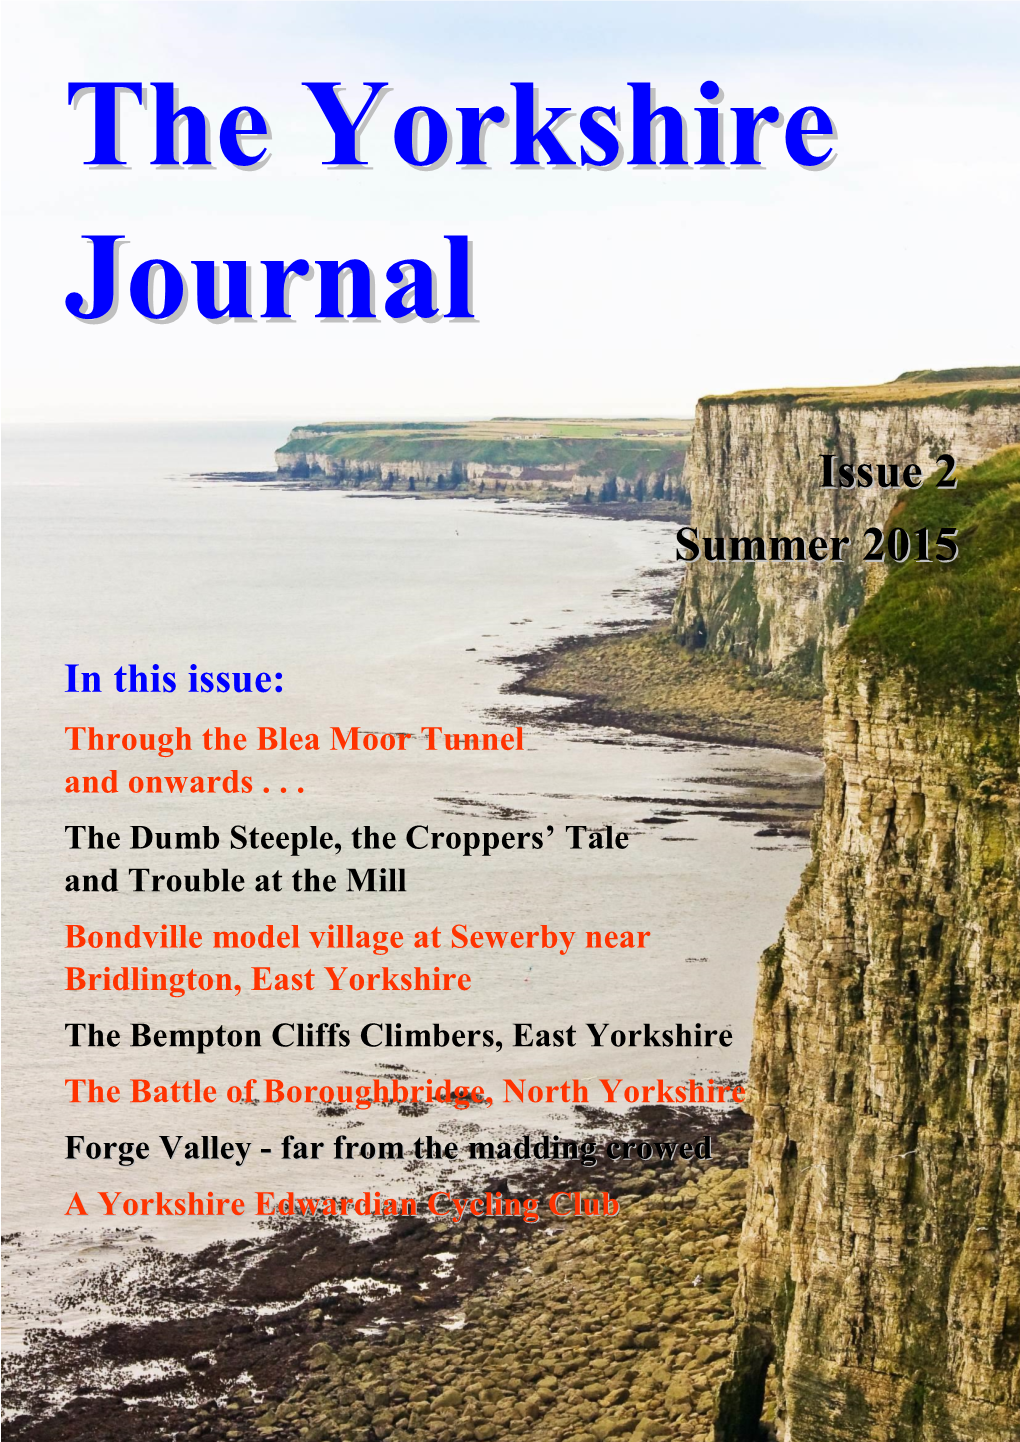 The Yorkshire Journal Issue 2 Summer 2015